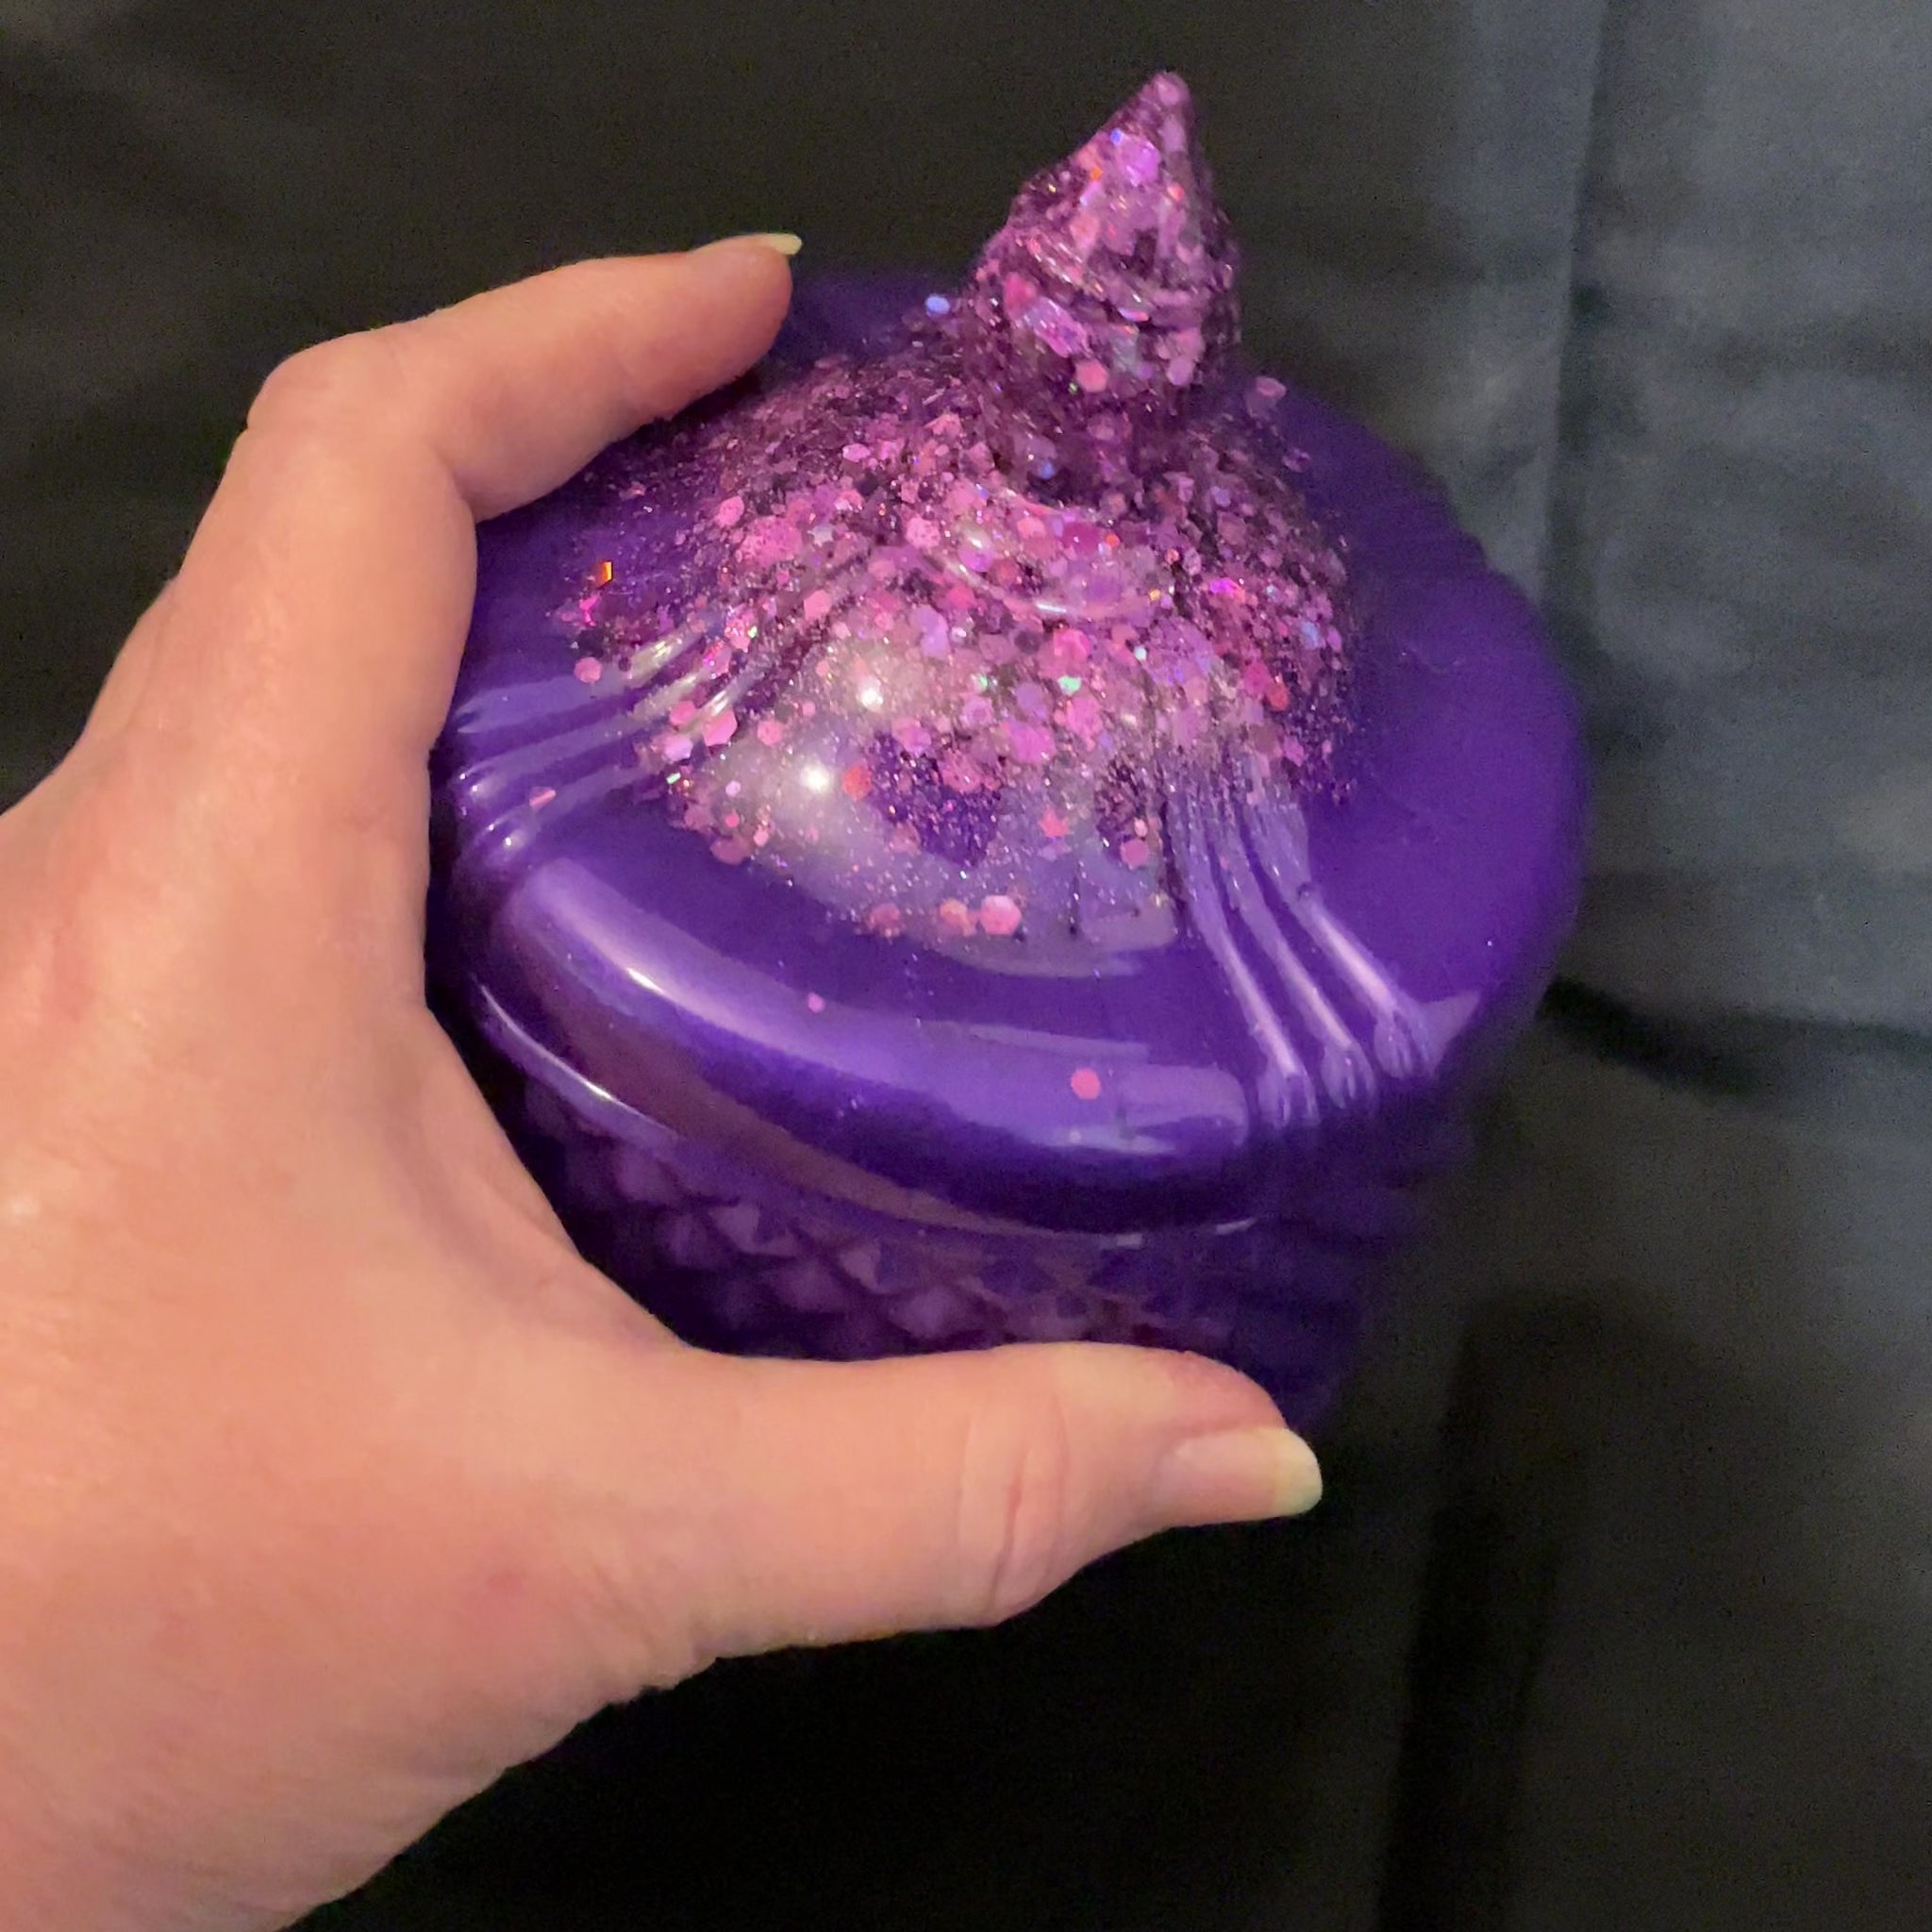 Handmade Pearly Bright Purple Glitter Trinket Box video showing how the glitter sparkles in the light.